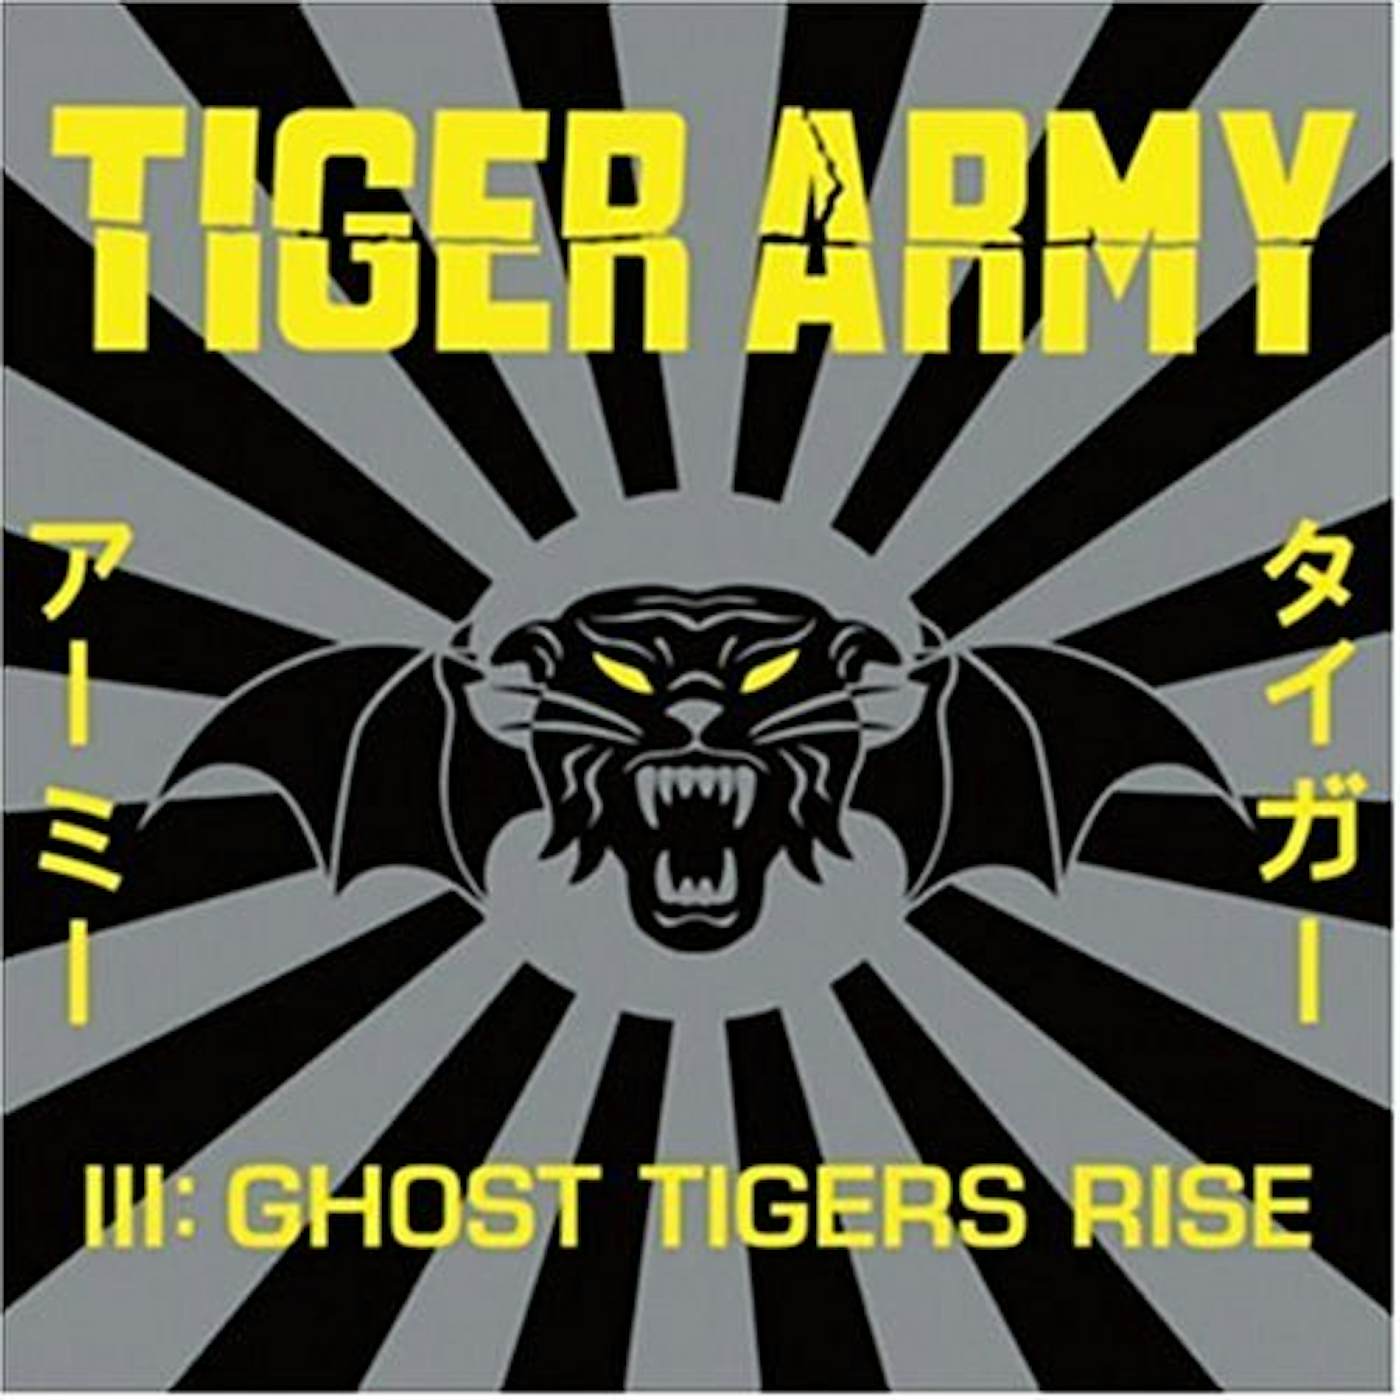 TIGER ARMY III: GHOST TIGERS RISE CD